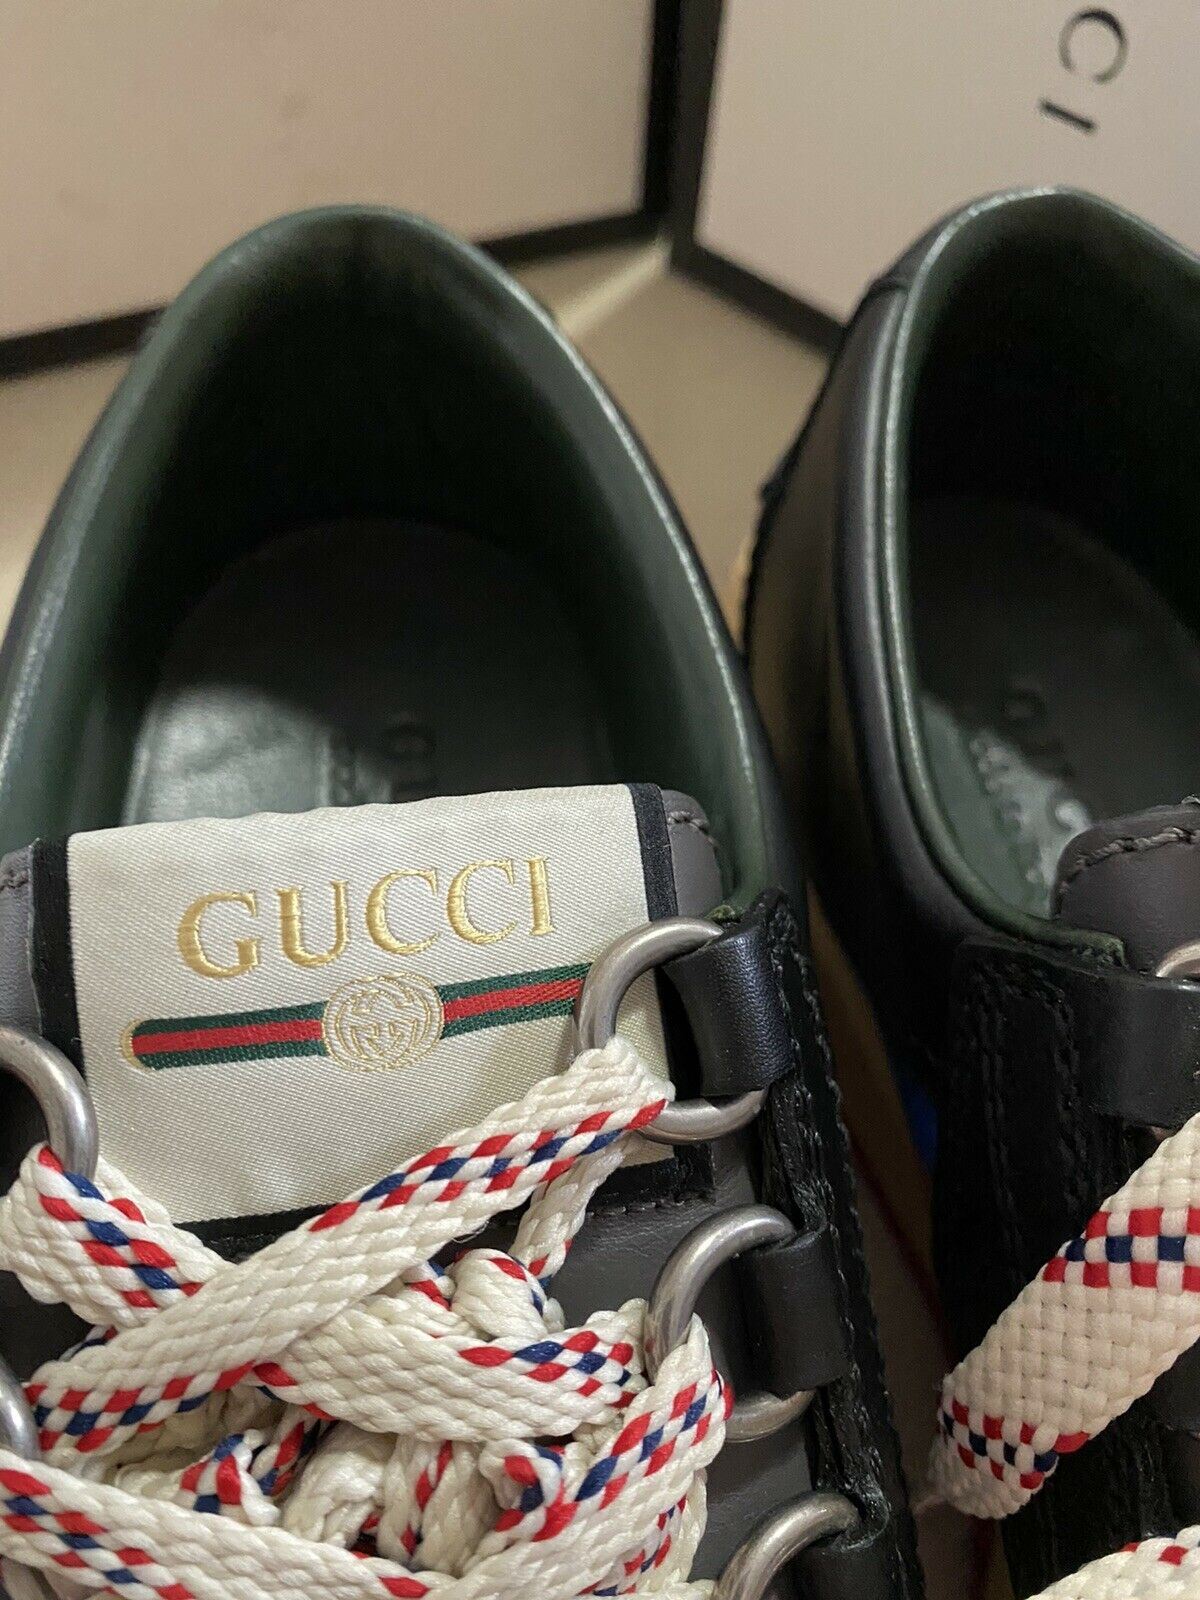 New Gucci Men’s Leather Sneakers Shoes Black 10 US ( 9 UK ) Italy